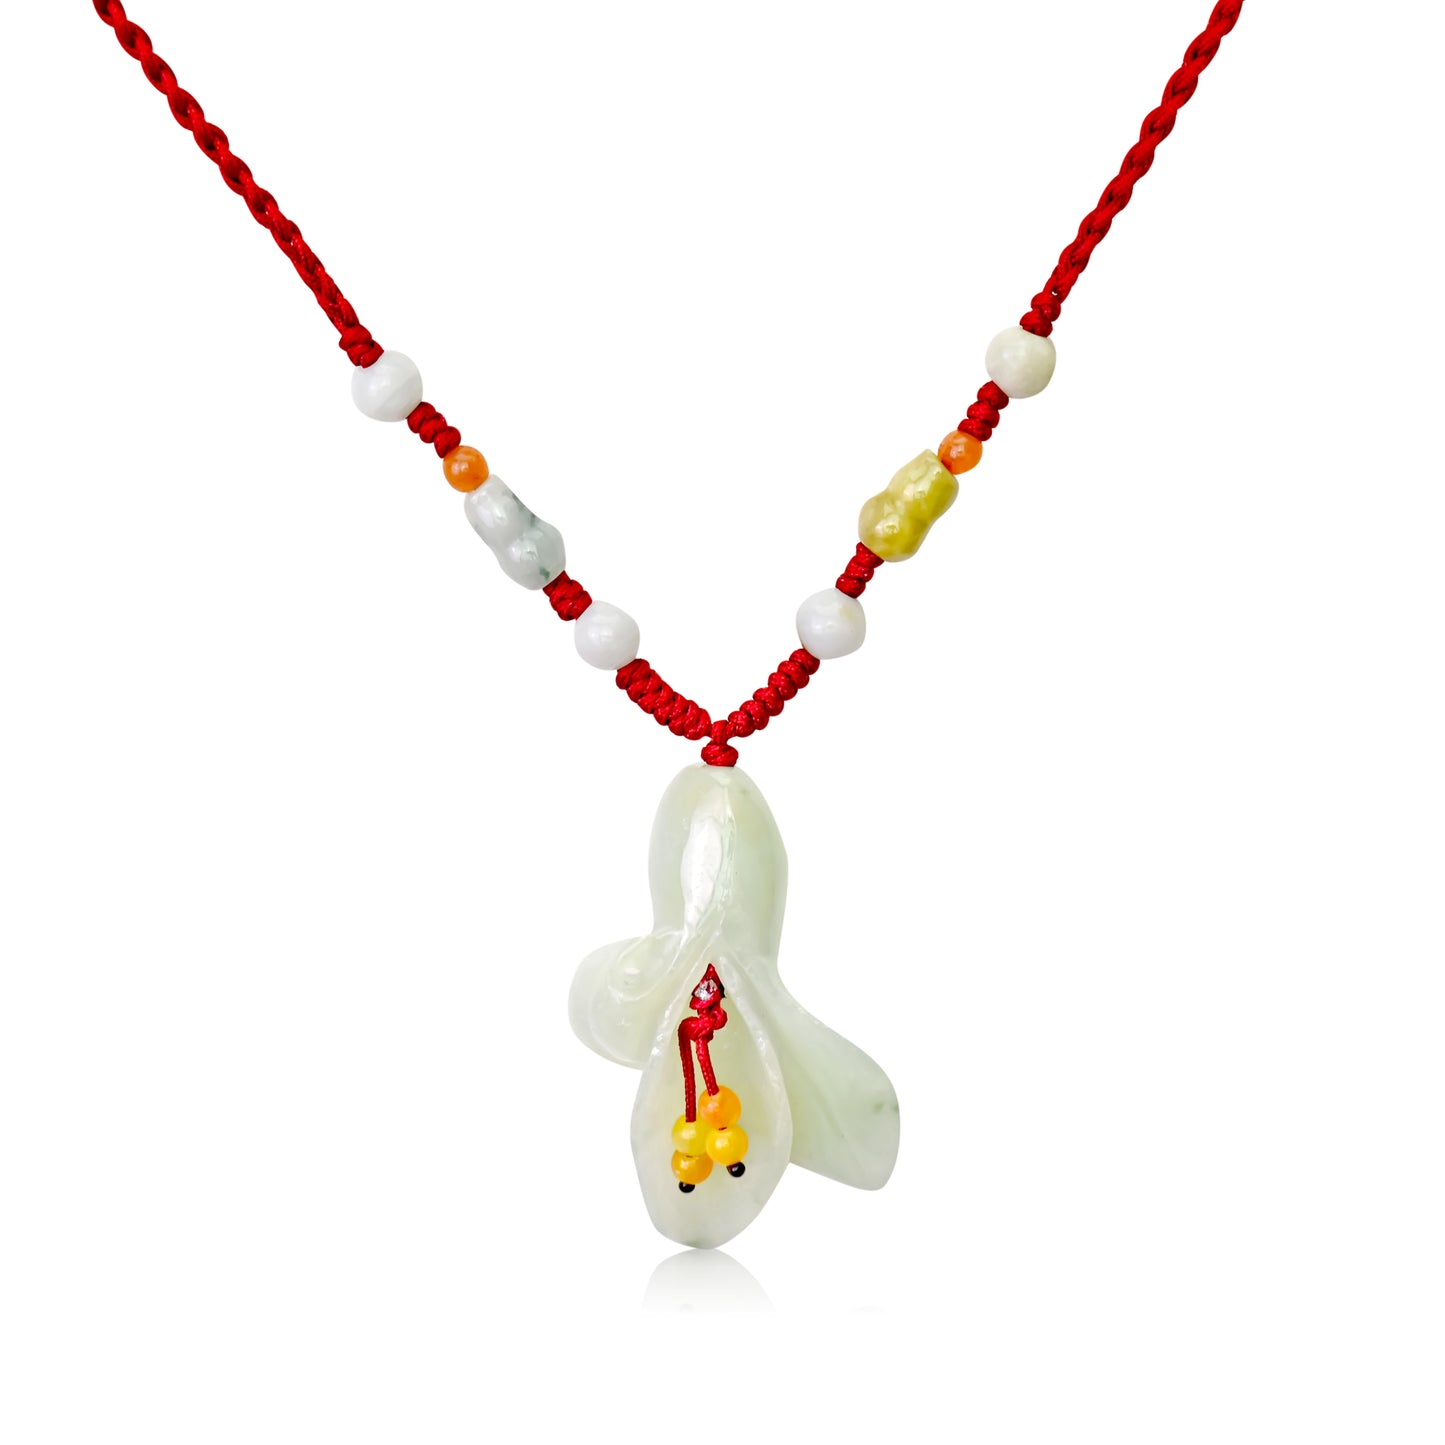 Add Beauty and Charm with the Calla Lily Necklace made with Maroon Cord